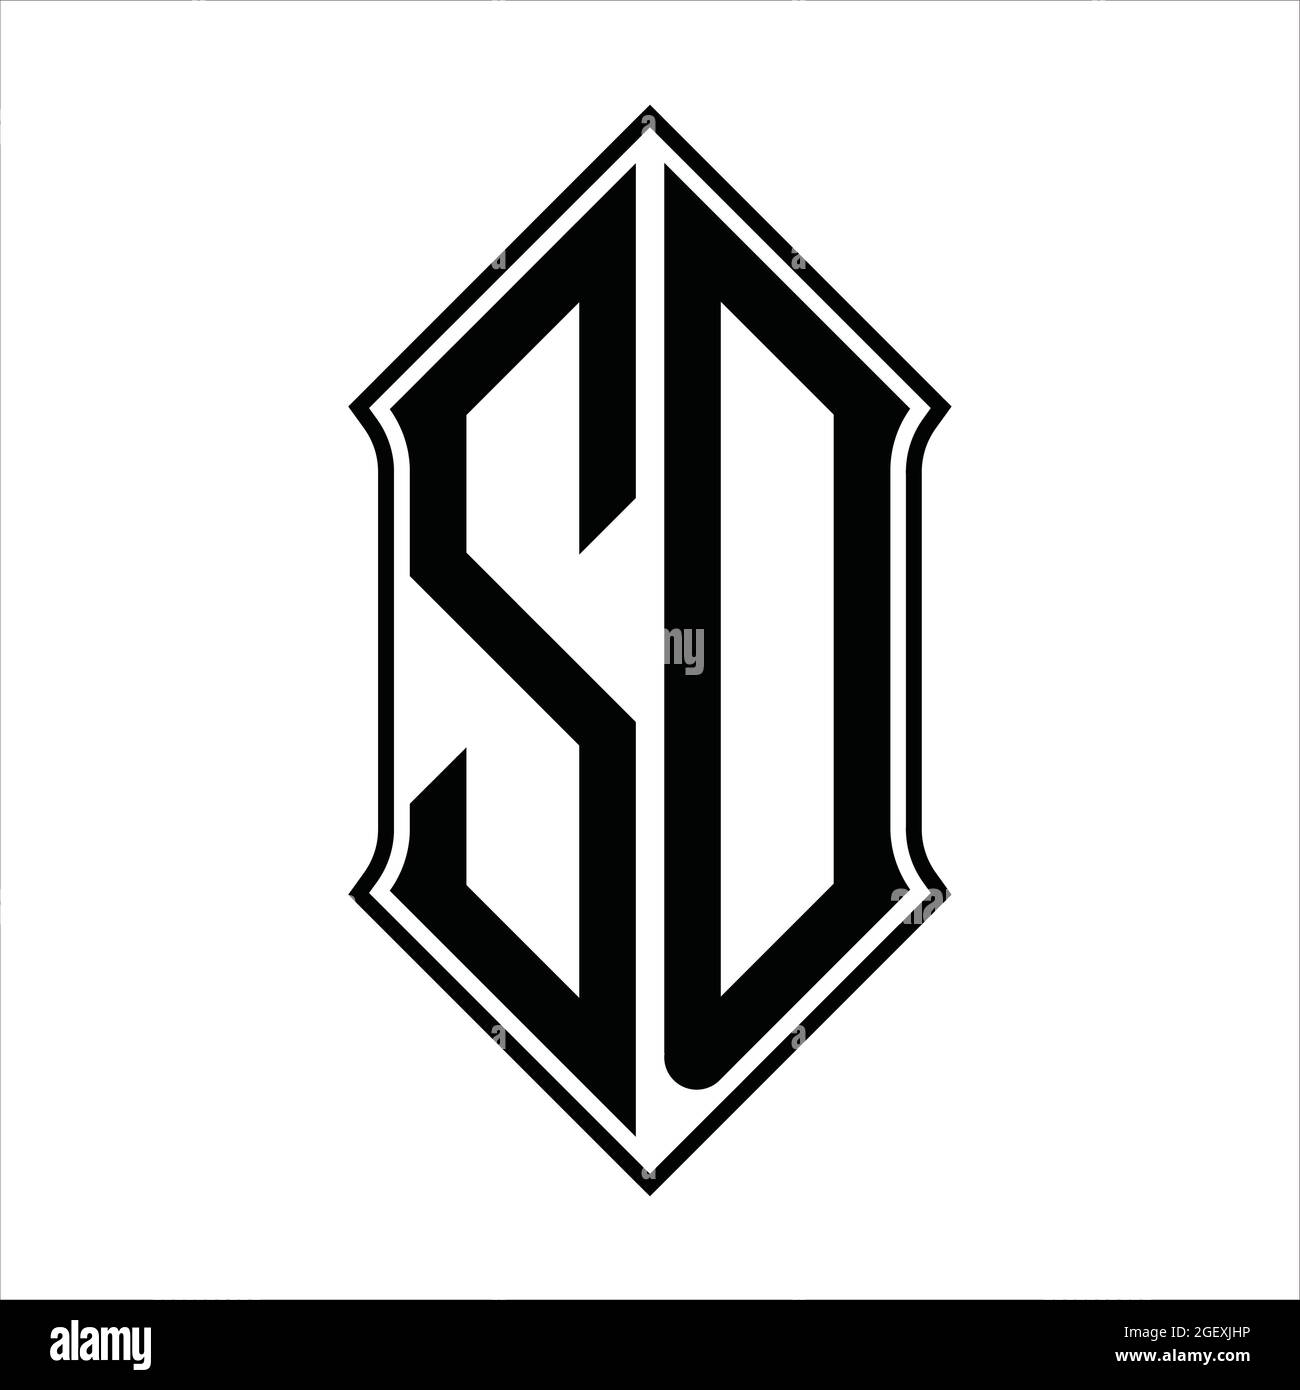 SD Logo monogram with shieldshape and black outline design template vector icon abstract Stock Vector